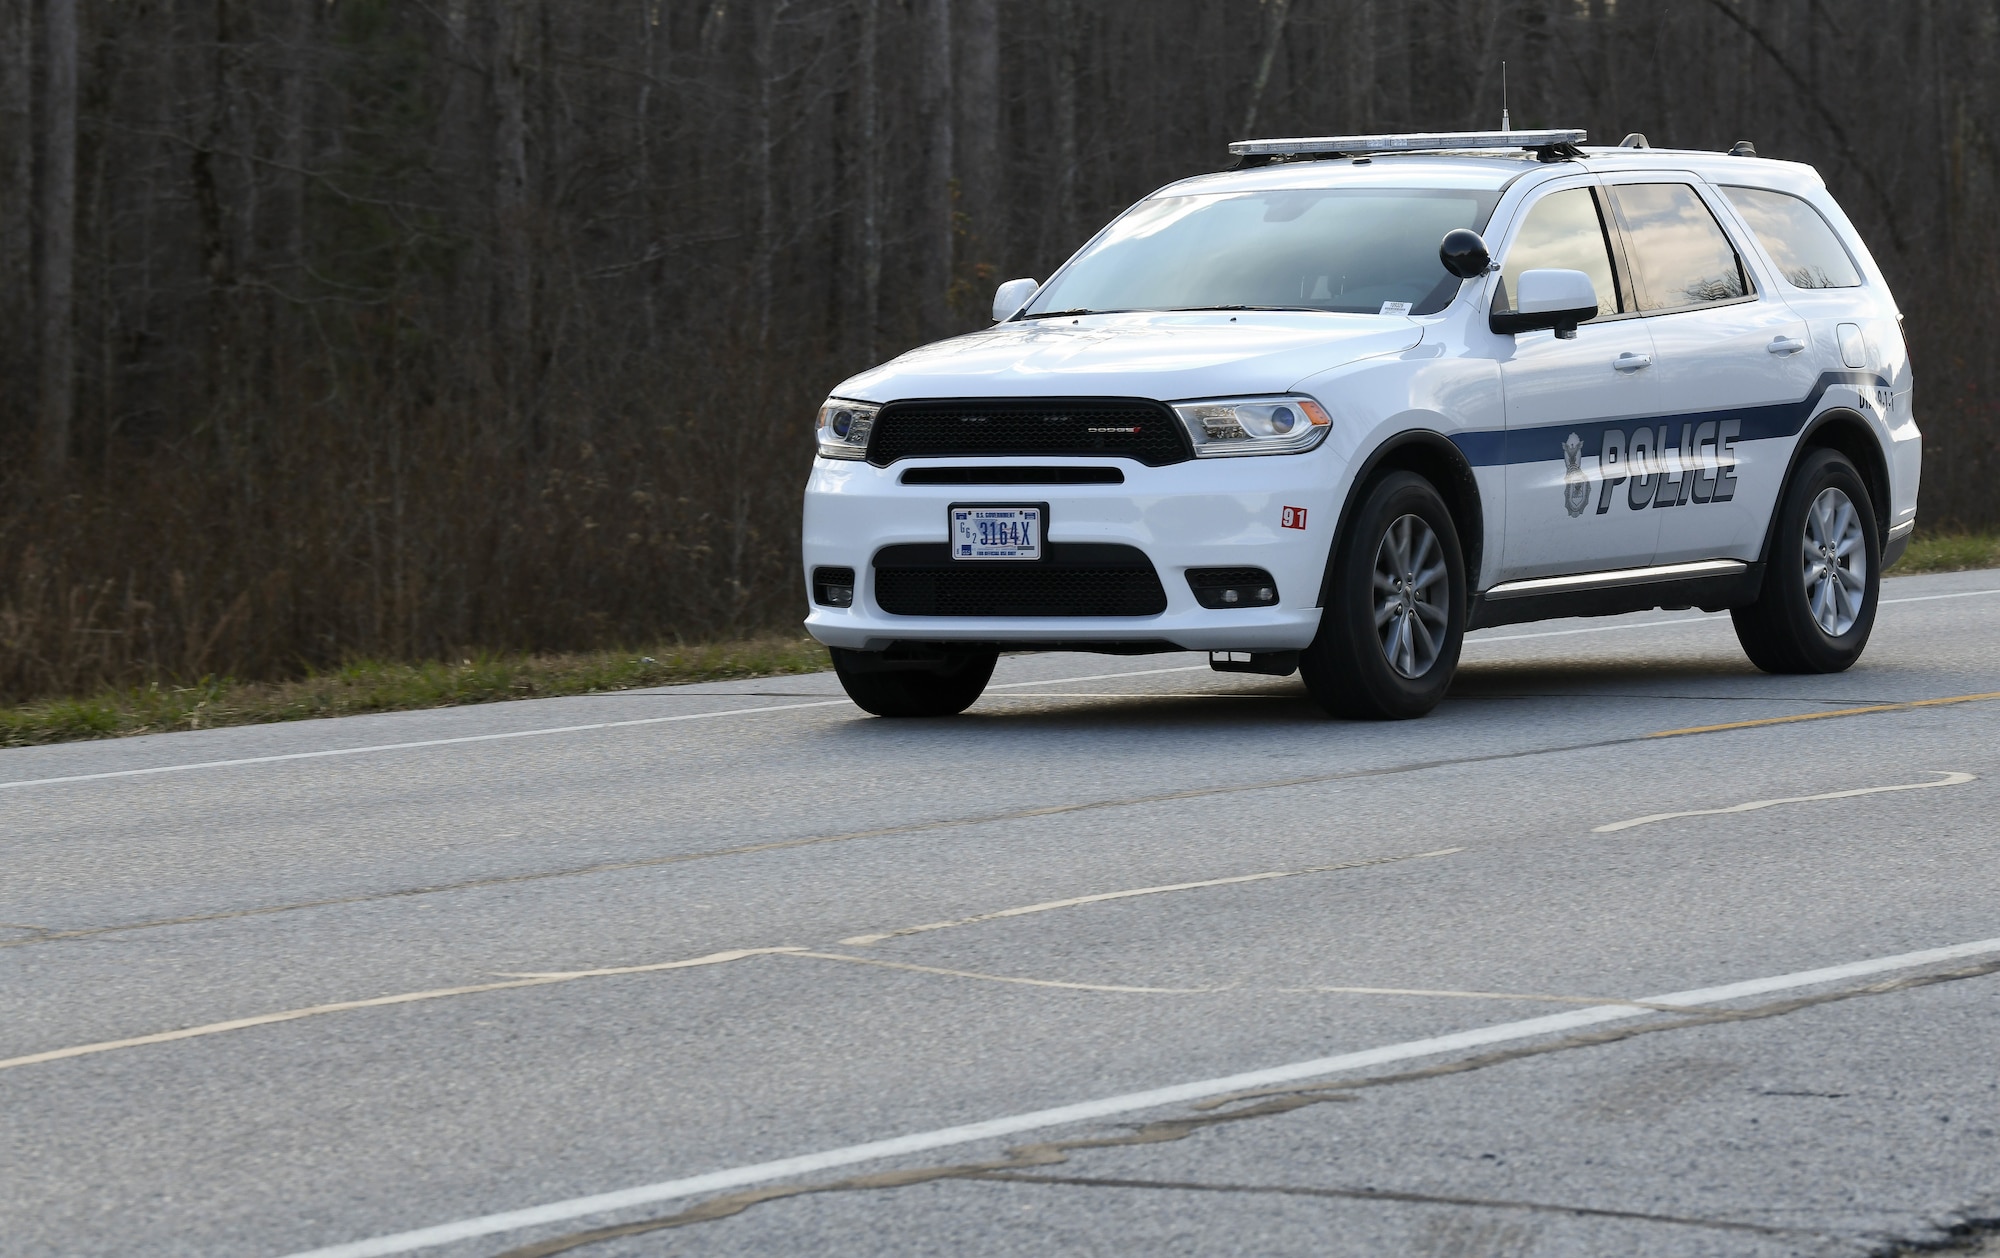 Sgt. George Blasingame, a Dept. of the Air Force Police Officer at Arnold Air Force Base, Tenn, patrols along Wattendorf Highway to watch for motorists committing moving violations, Dec. 17, 2020. DAF Officers began patrolling Arnold in late August. The SUV driven by Blasingame was recently acquired for the new force, and another SUV is also on order. Motorists traveling Arnold AFB roadways should be mindful that the DAF officers can issue citations for moving violations. Motorists who are cited for moving violations on Arnold AFB property are assessed points. Points are entered into the Air Force Justice Information System and assessed against their on-base driving record. Accumulation of 12 points in 12 months or 18 points in 24 months normally results in loss of driving privileges for up to a year. If someone gets caught driving during their revocation period, an additional year is usually added to the penalty. (U.S. Air Force photo by Jill Pickett)